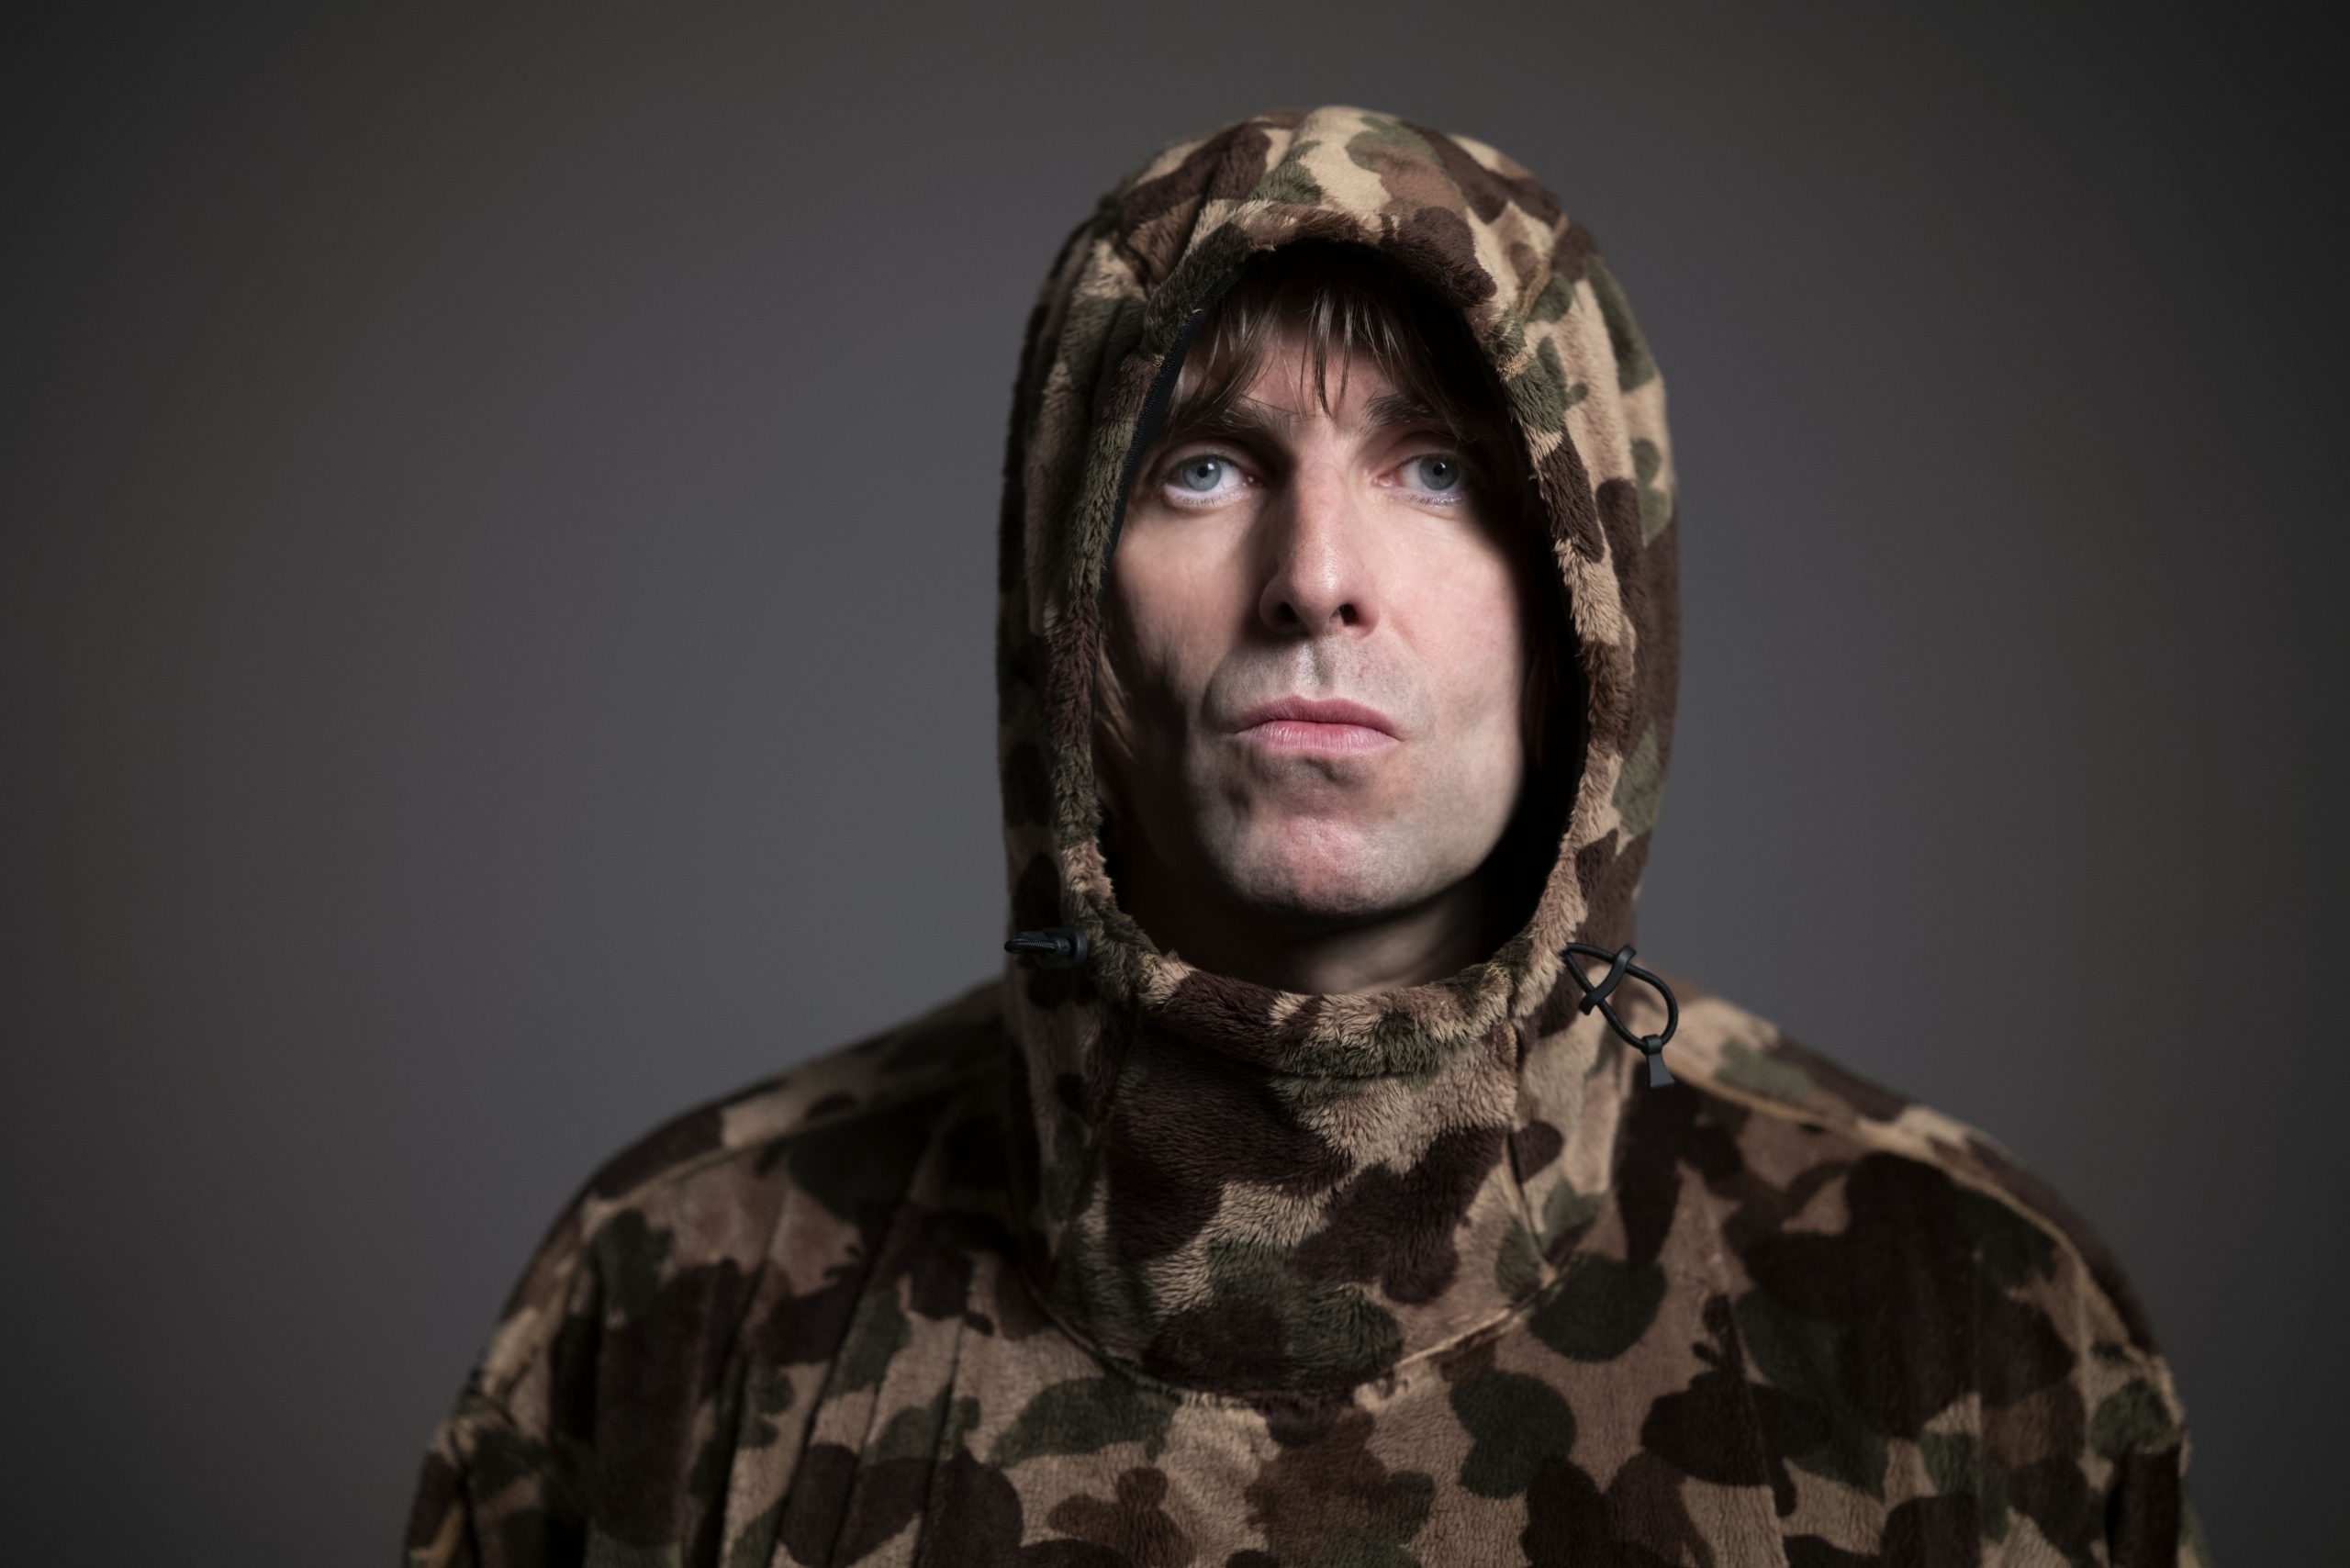 Liam Gallagher on Oasis, Noel and rock ‘n’ roll survival – World news